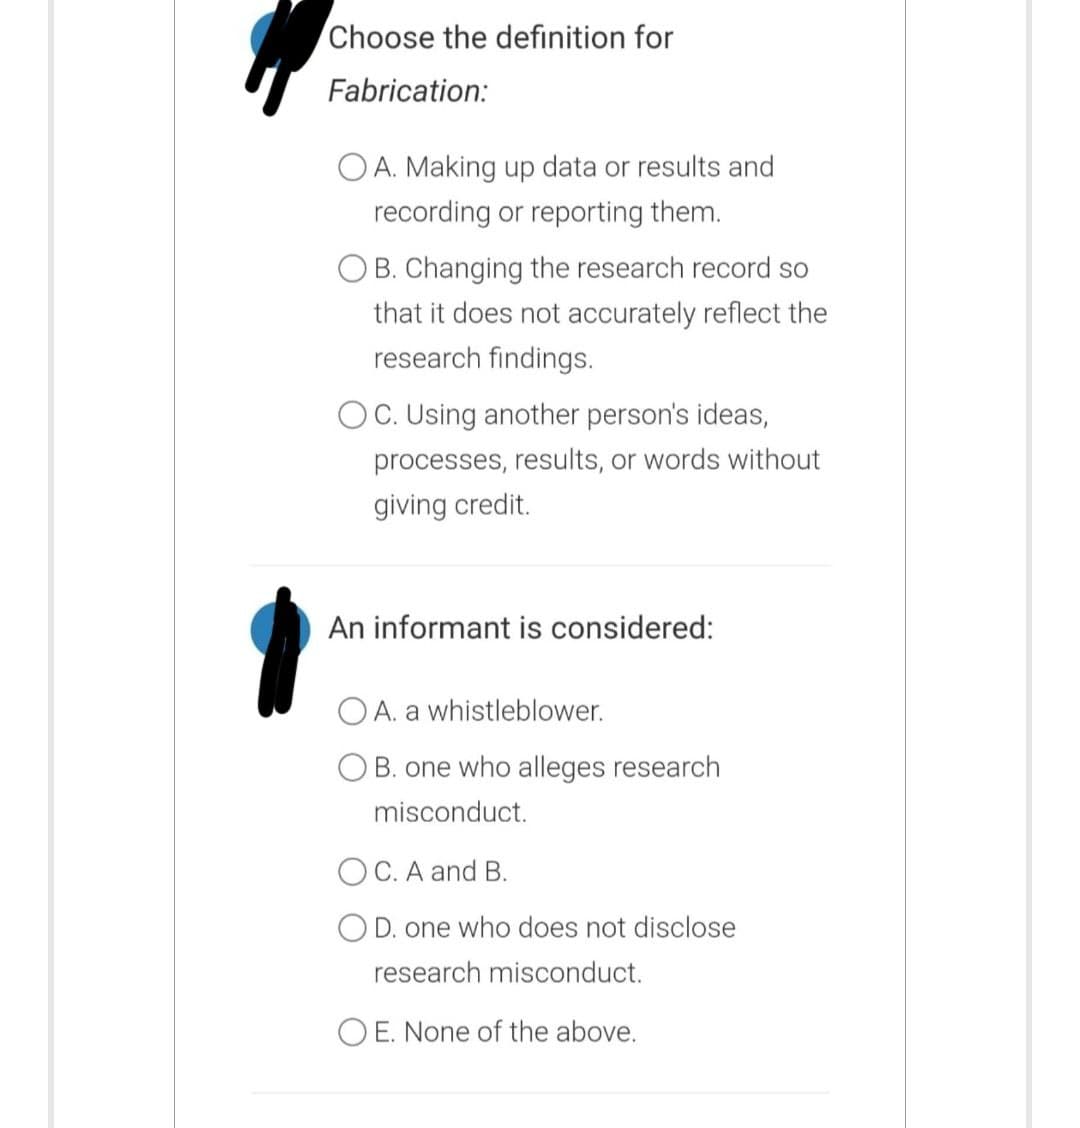 Choose the definition for
Fabrication:
OA. Making up data or results and
recording or reporting them.
OB. Changing the research record so
that it does not accurately reflect the
research findings.
OC. Using another person's ideas,
processes, results, or words without
giving credit.
An informant is considered:
OA. a whistleblower.
OB. one who alleges research
misconduct.
OC. A and B.
O D. one who does not disclose
research misconduct.
OE. None of the above.